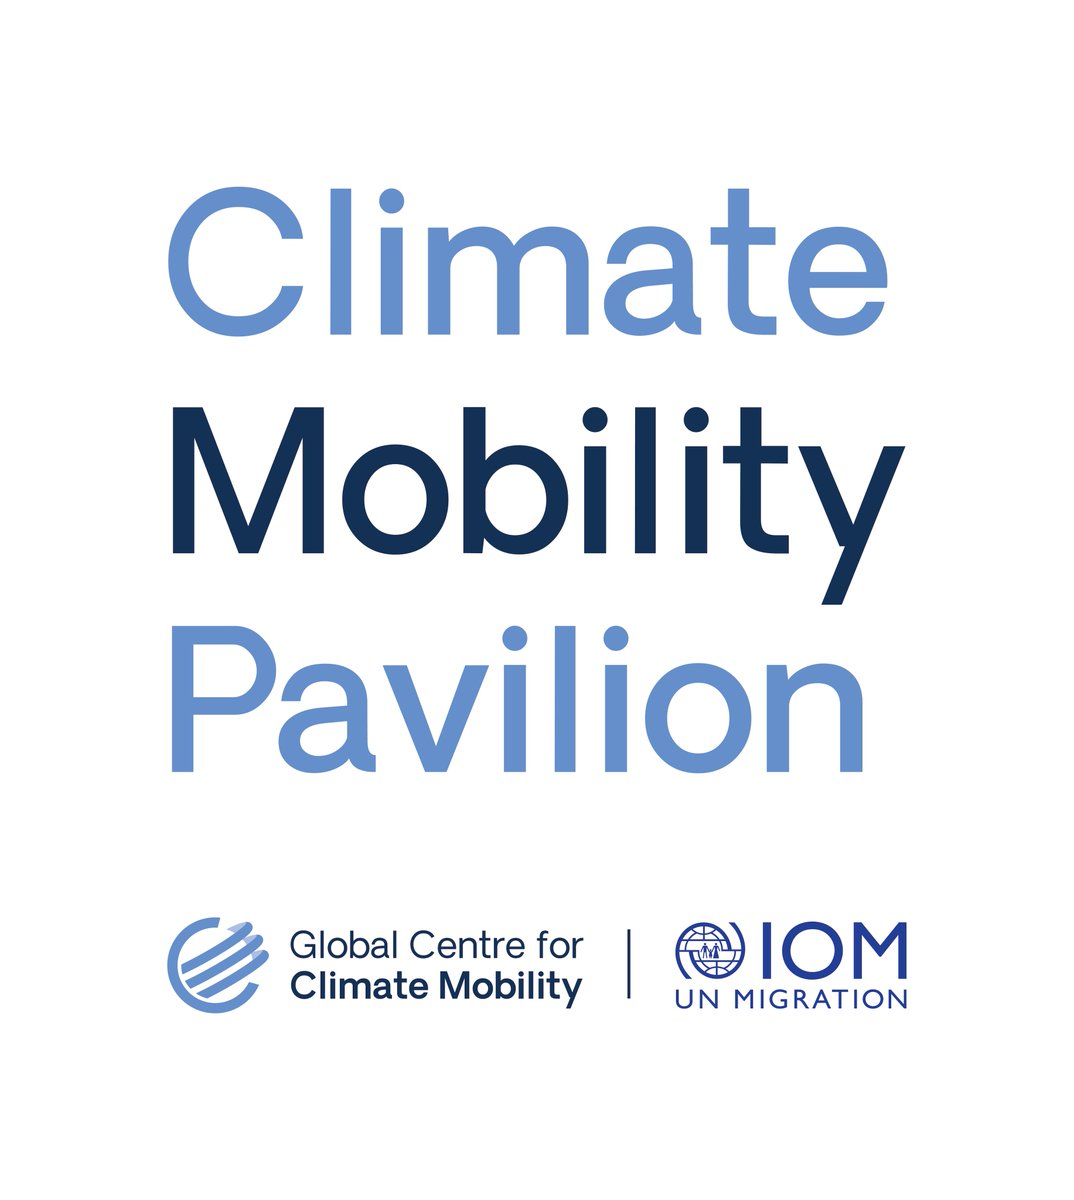 Join the Climate Mobility Pavilion at #COP28! A hub for addressing climate-forced migration and displacement, focusing on adaptation and inclusive action.

🗺️ bit.ly/COP28-Blue-Zone

#ClimateAction | #AdaptationJourneys | #ClimateMobility